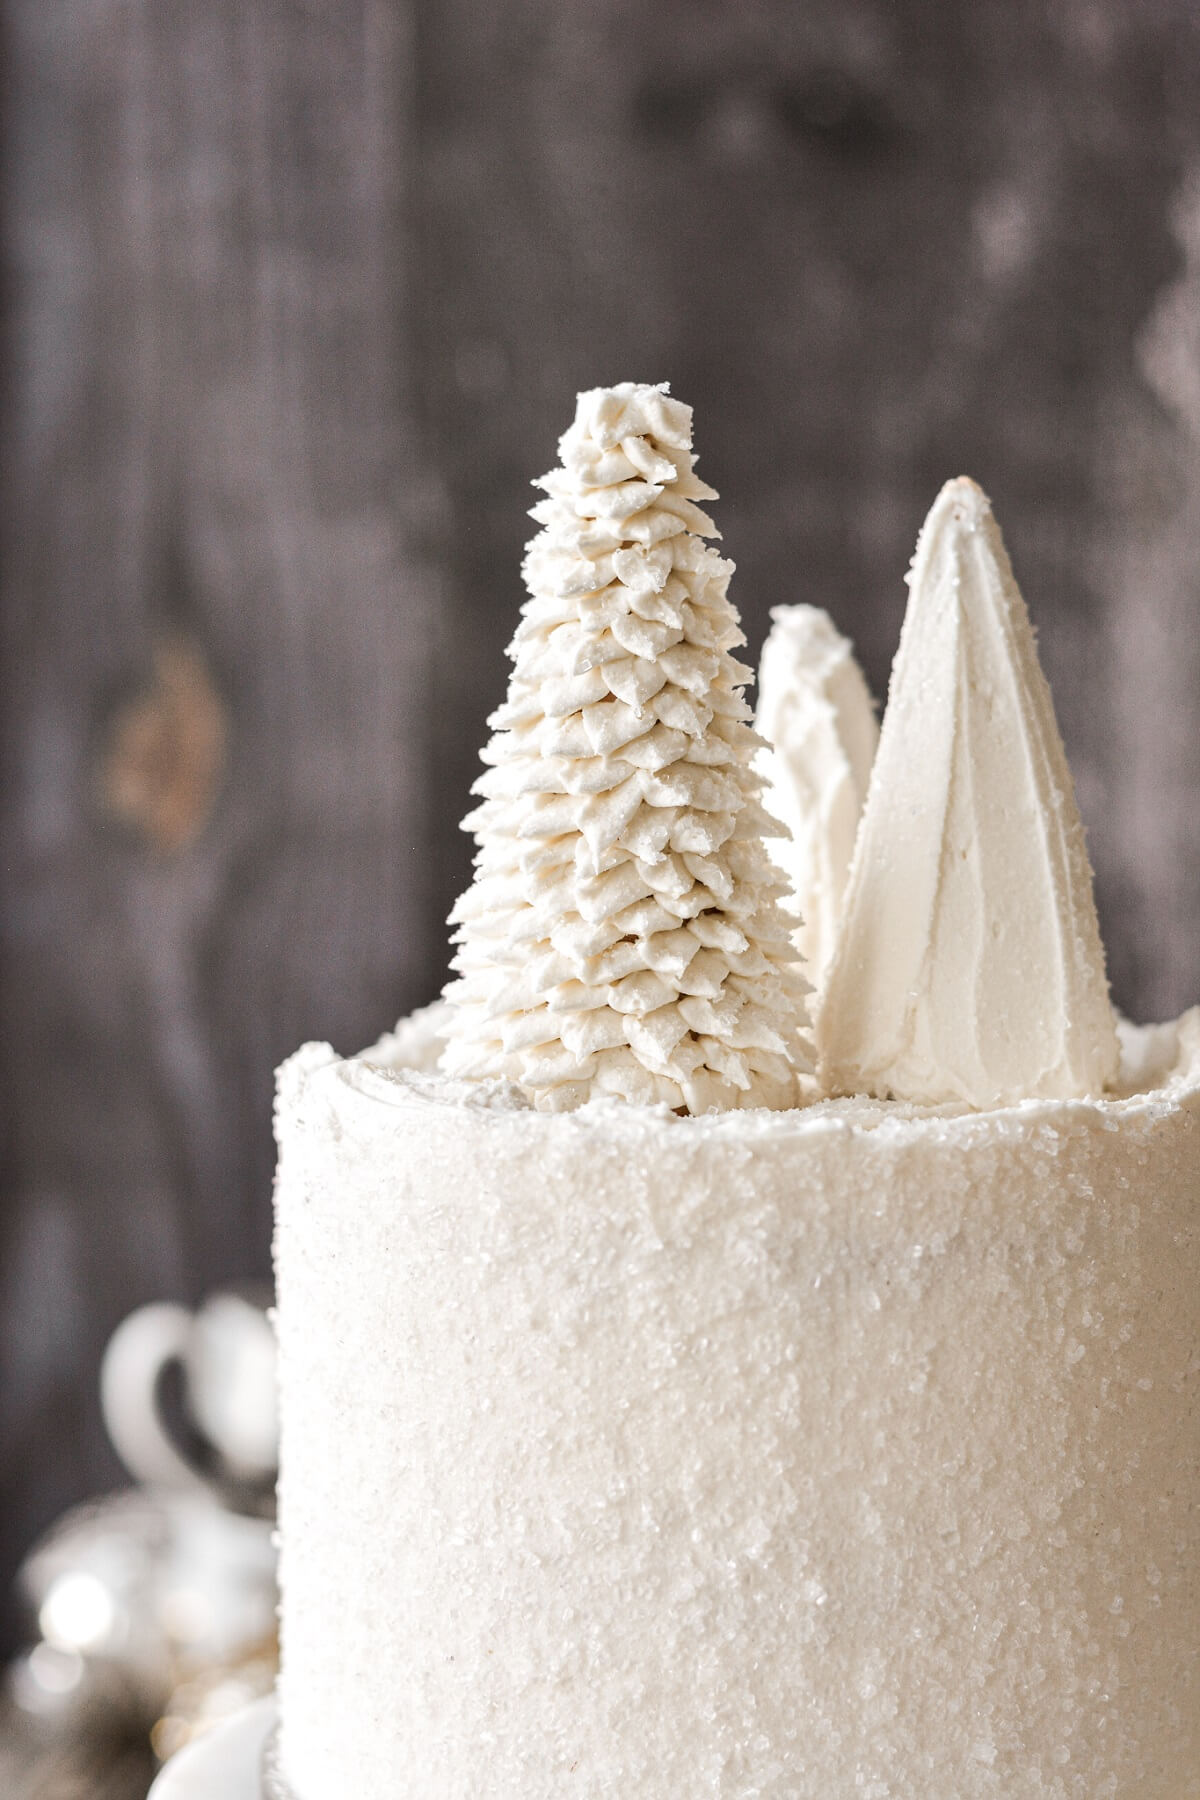 Three ice cream cones frosted like Christmas trees on a cake.